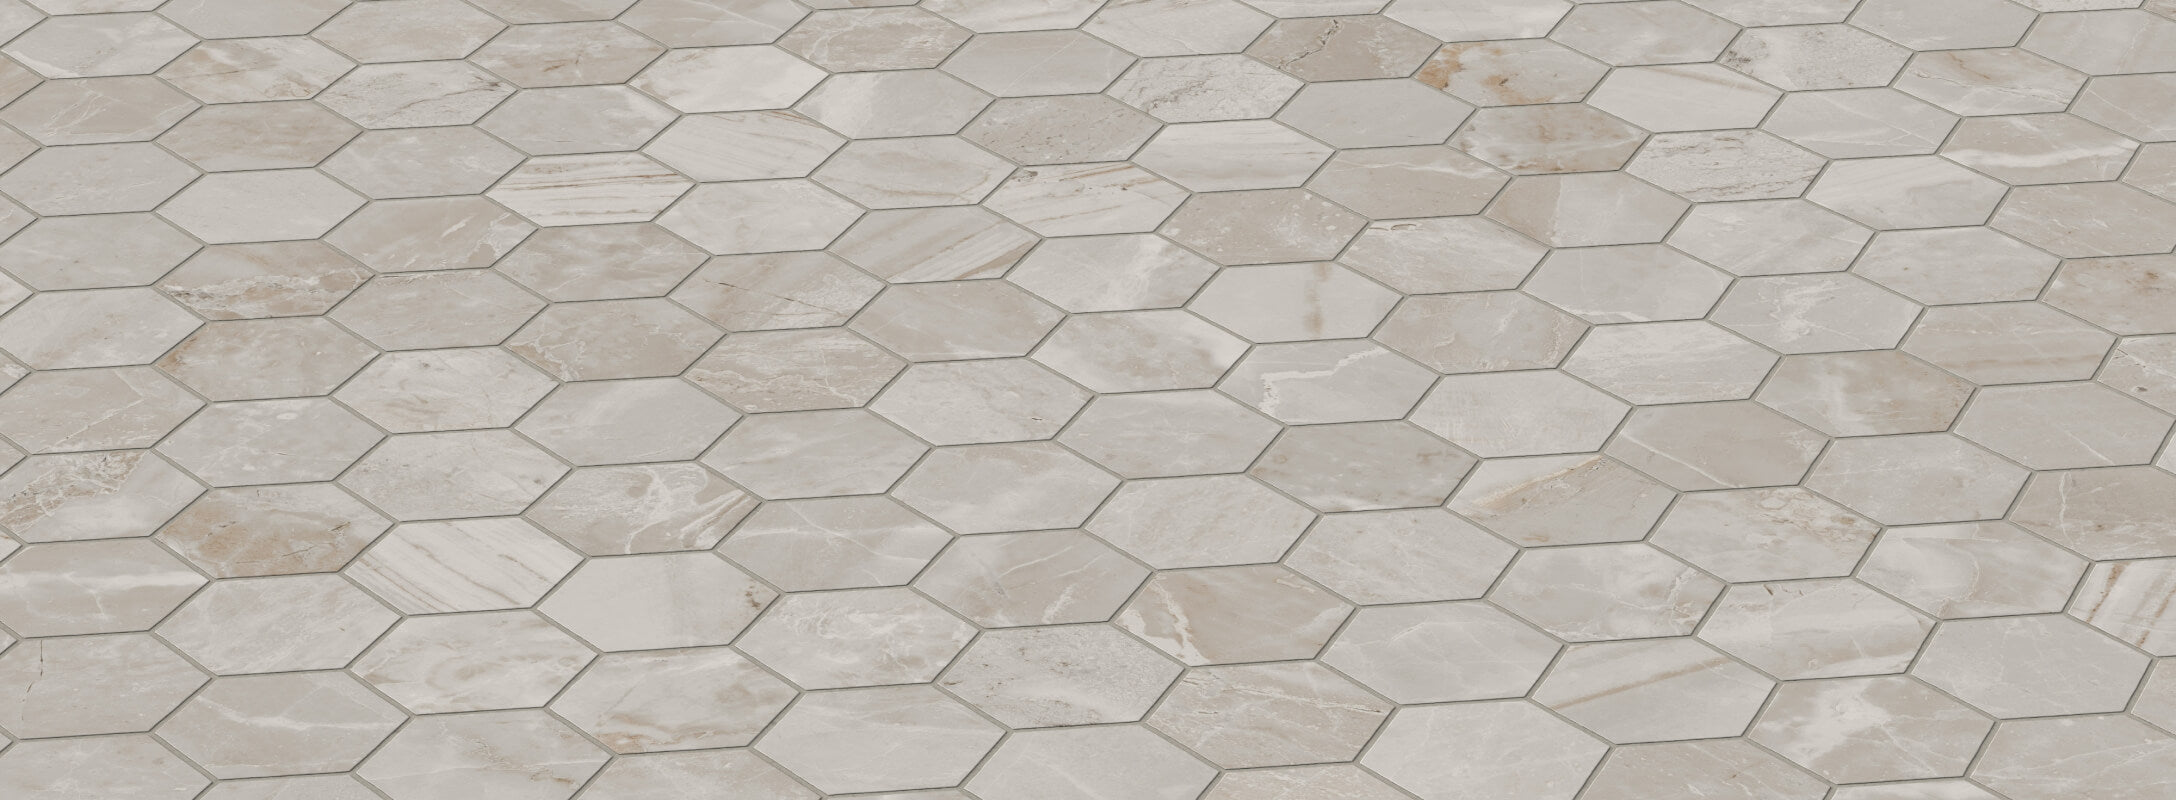 Elegant hexagonal mosaic taupe tiles with natural marbling, beautifully interlocking to create a sophisticated and timeless floor design